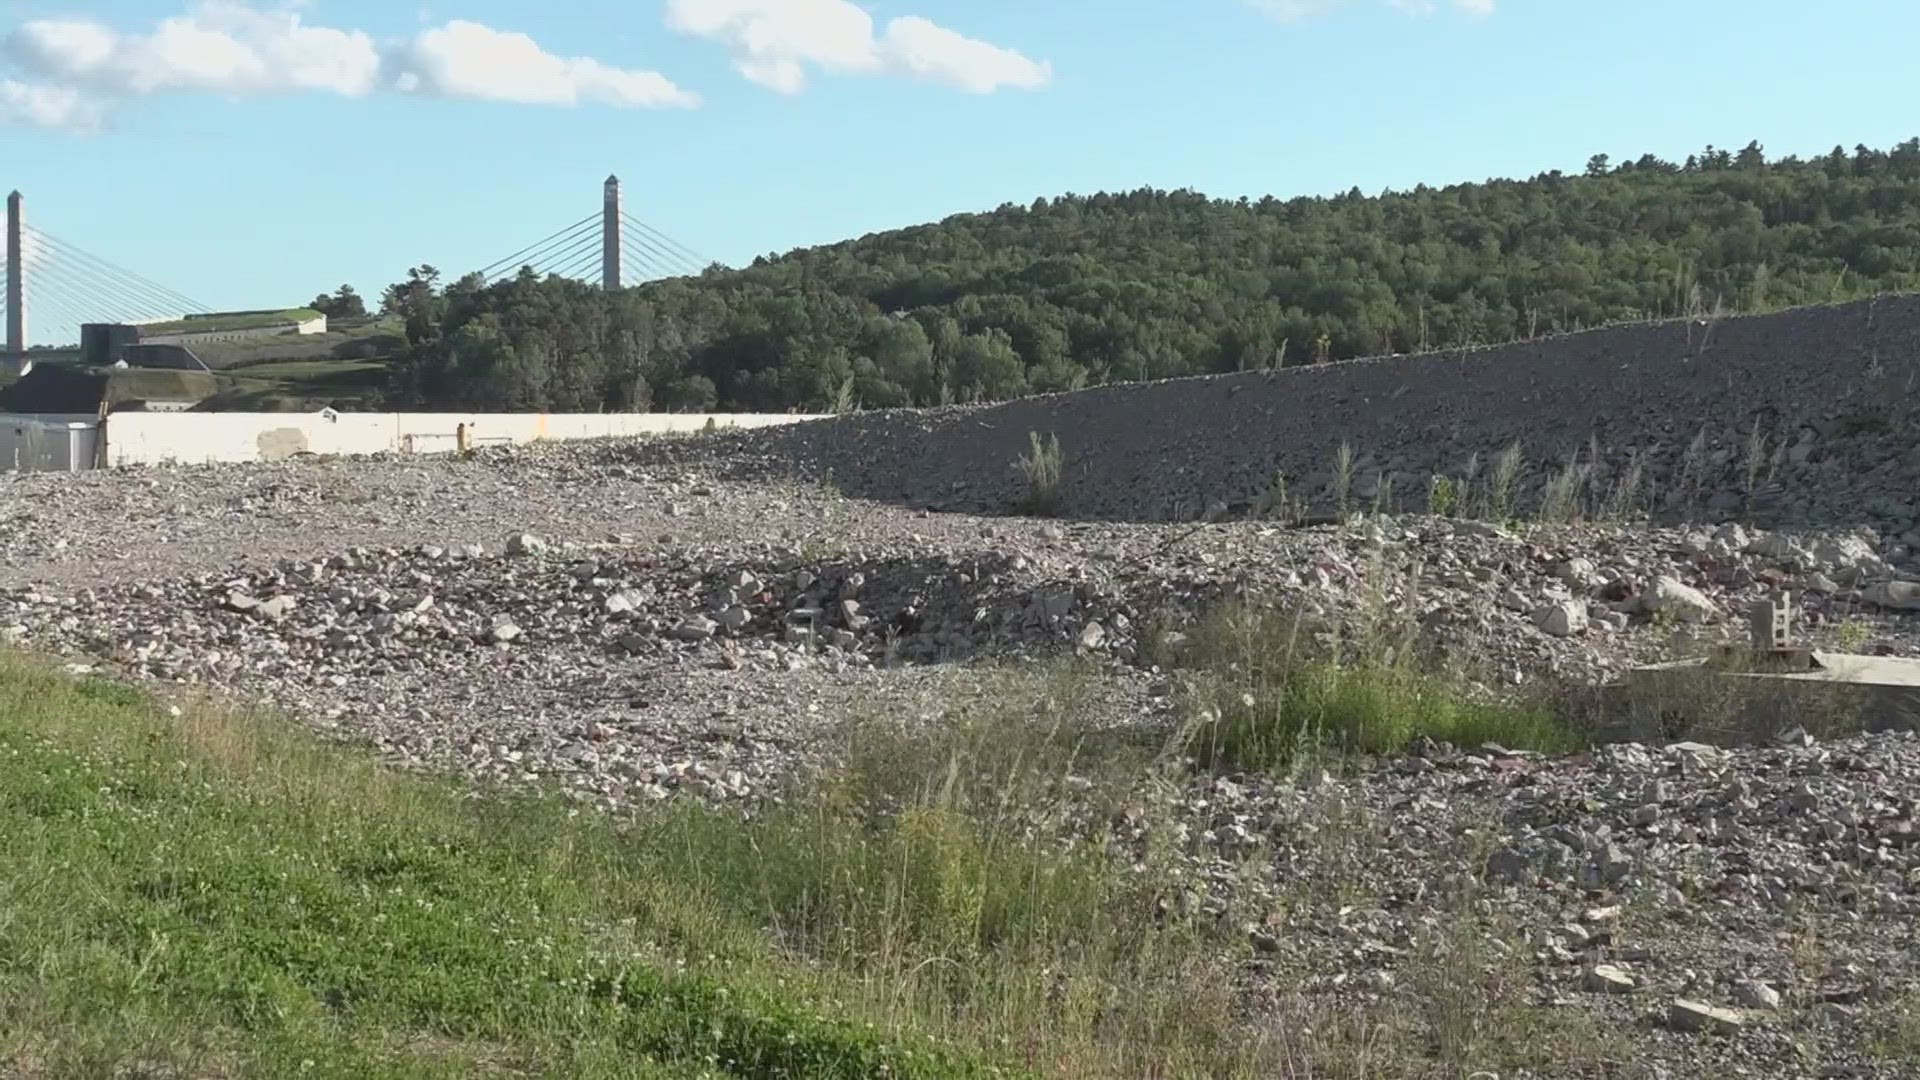 The Maine Department of Environmental Protection has called for the site to be cleaned up, and closed for good.